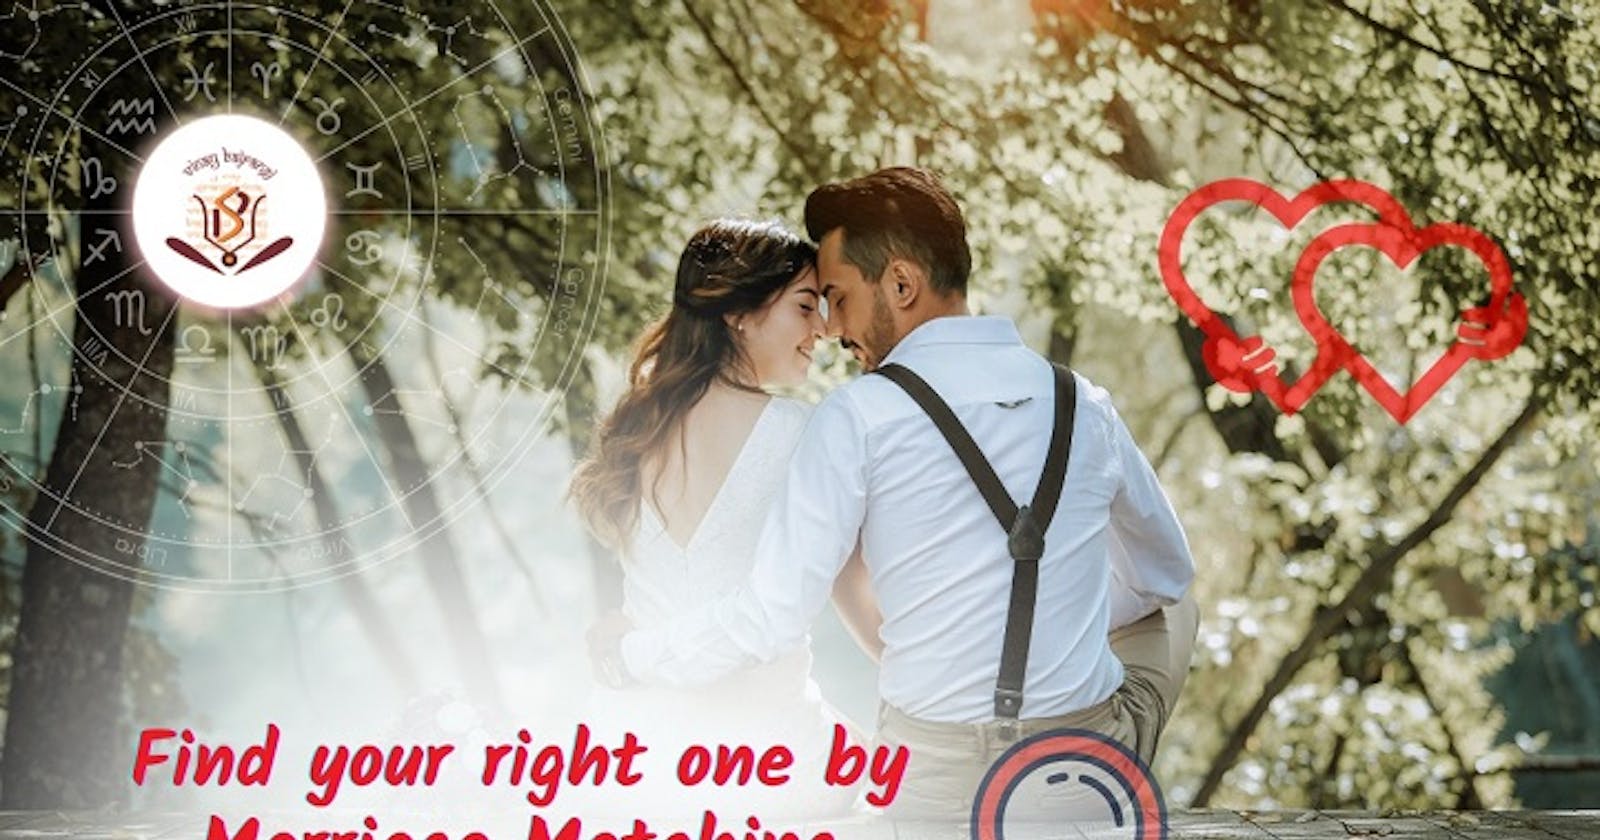 Find Your Right One by Marriage Matching